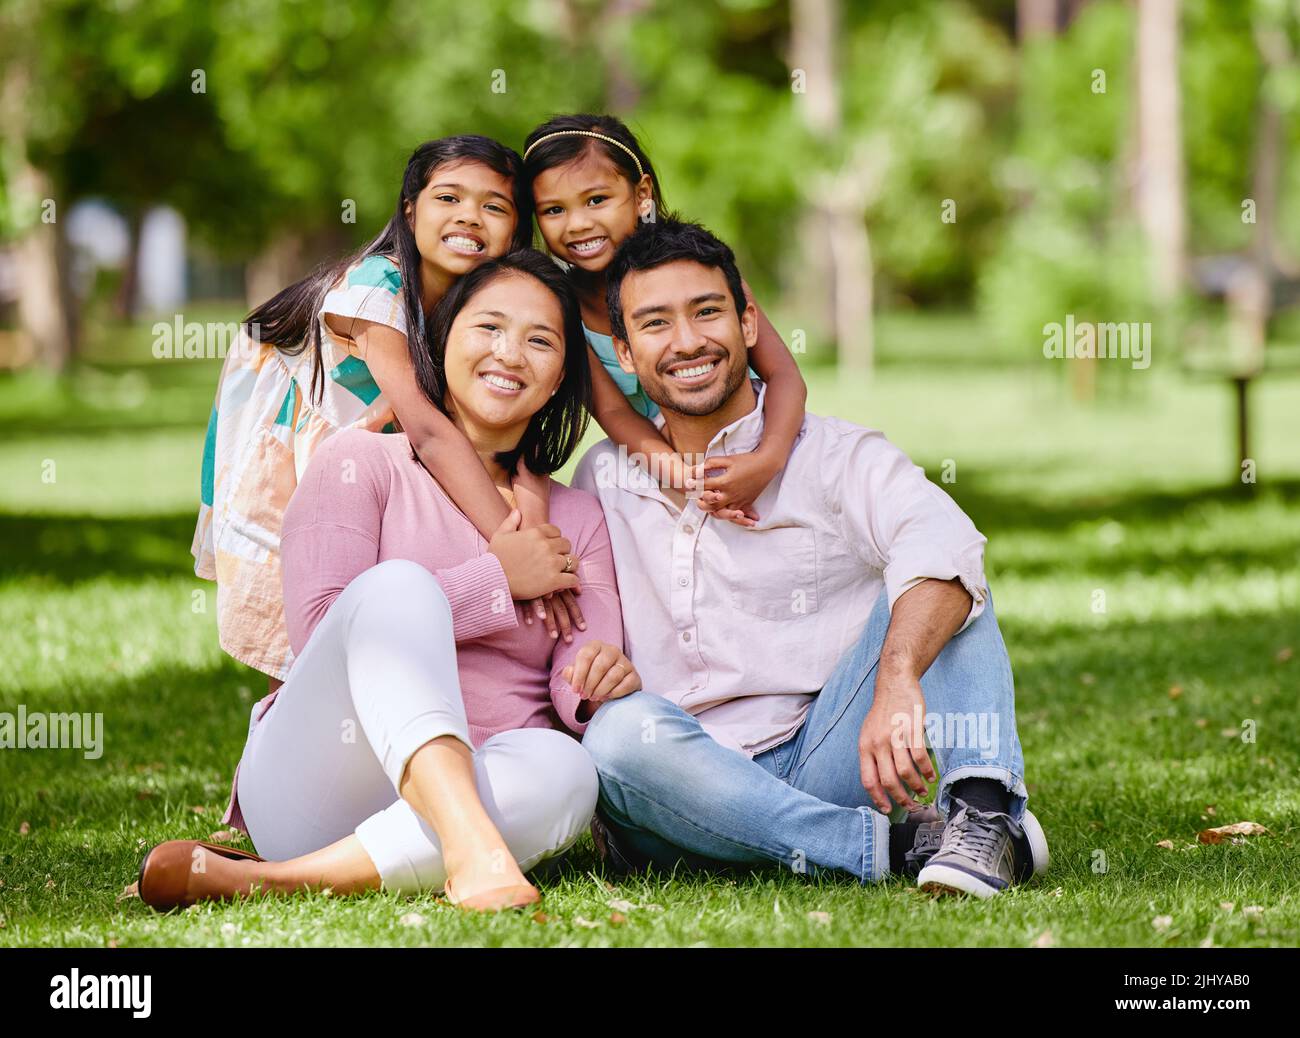 Portrait of happy asian family in the park. Adorable little girls bonding and hugging their parents outside in a park. Full length husband and wife Stock Photo